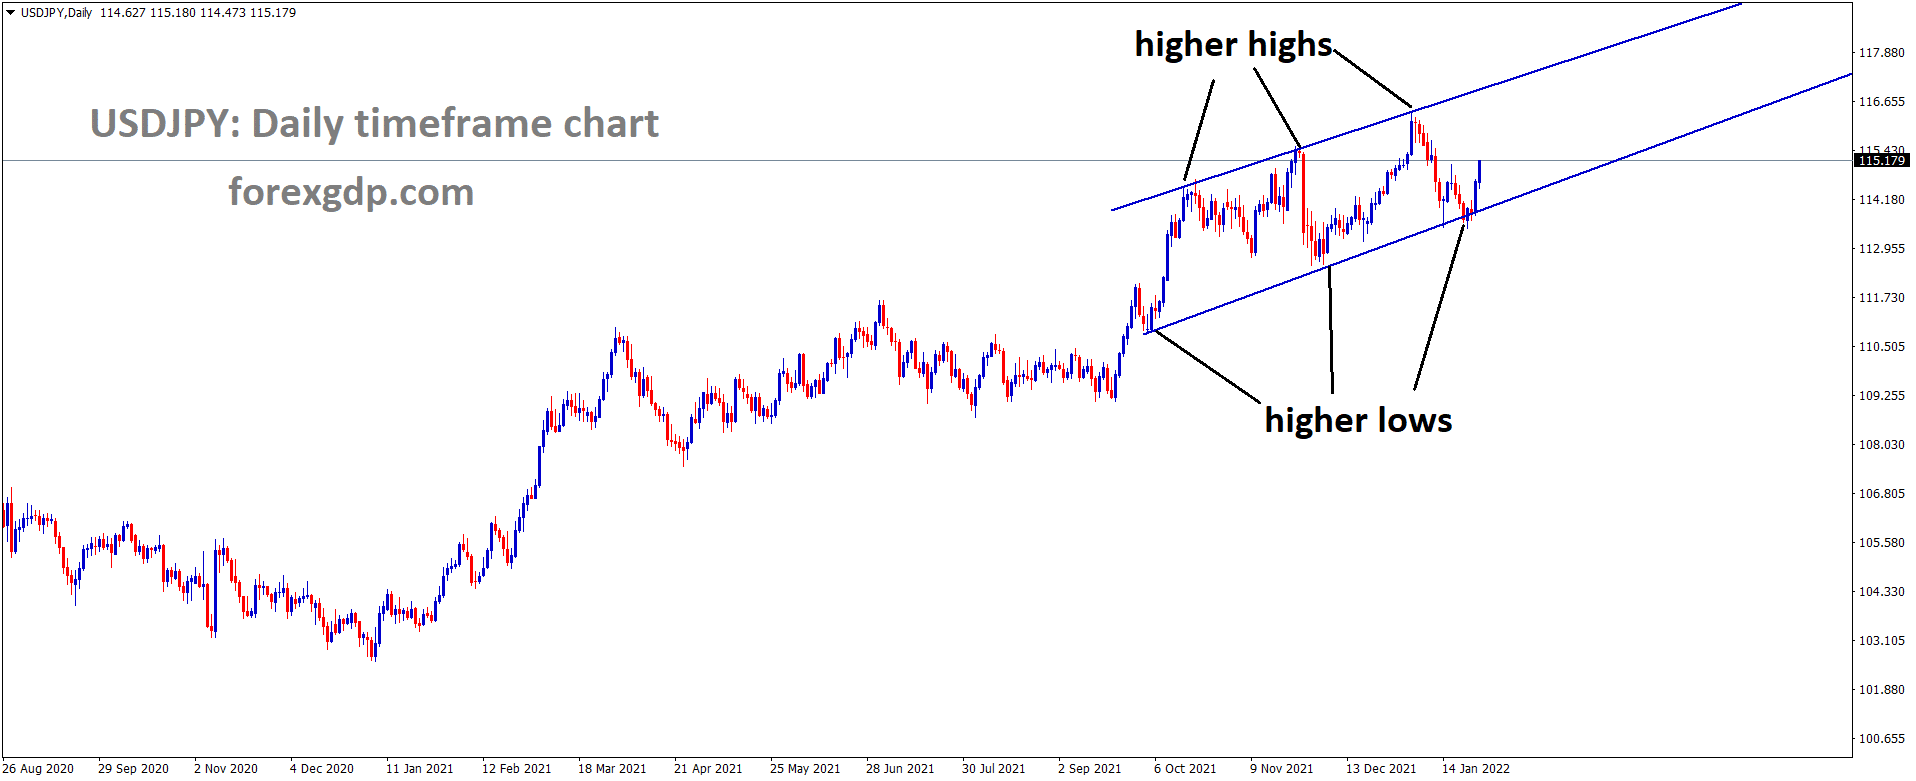 USDJPY is moving in an Ascending channel and the market has rebounded from the higher low area of the Channel 1